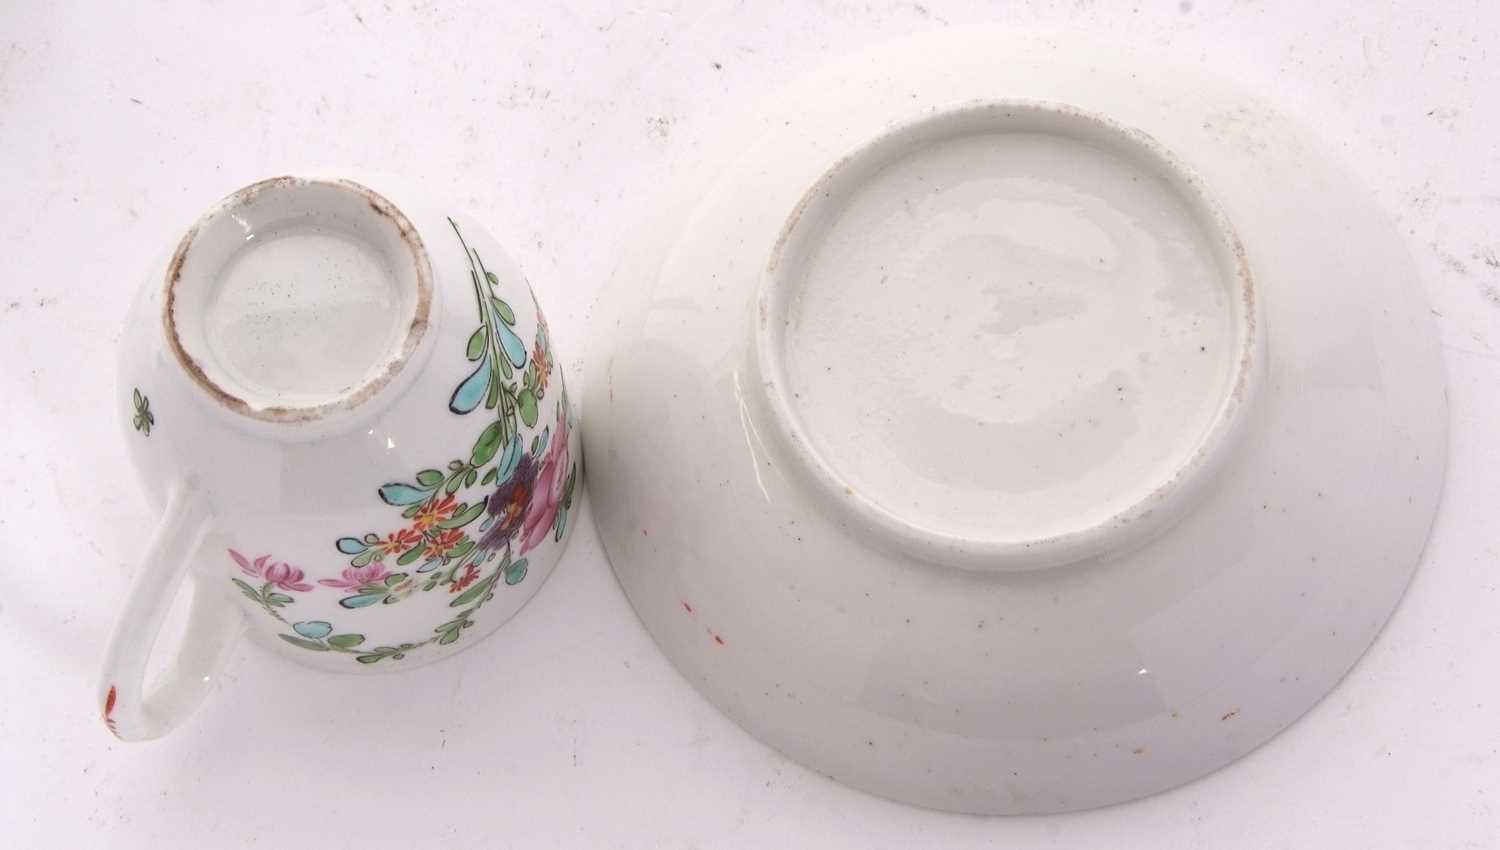 A Lowestoft porcelain cup and saucer circa 1770 with polychrome designs of flowers in Curtis - Image 4 of 4